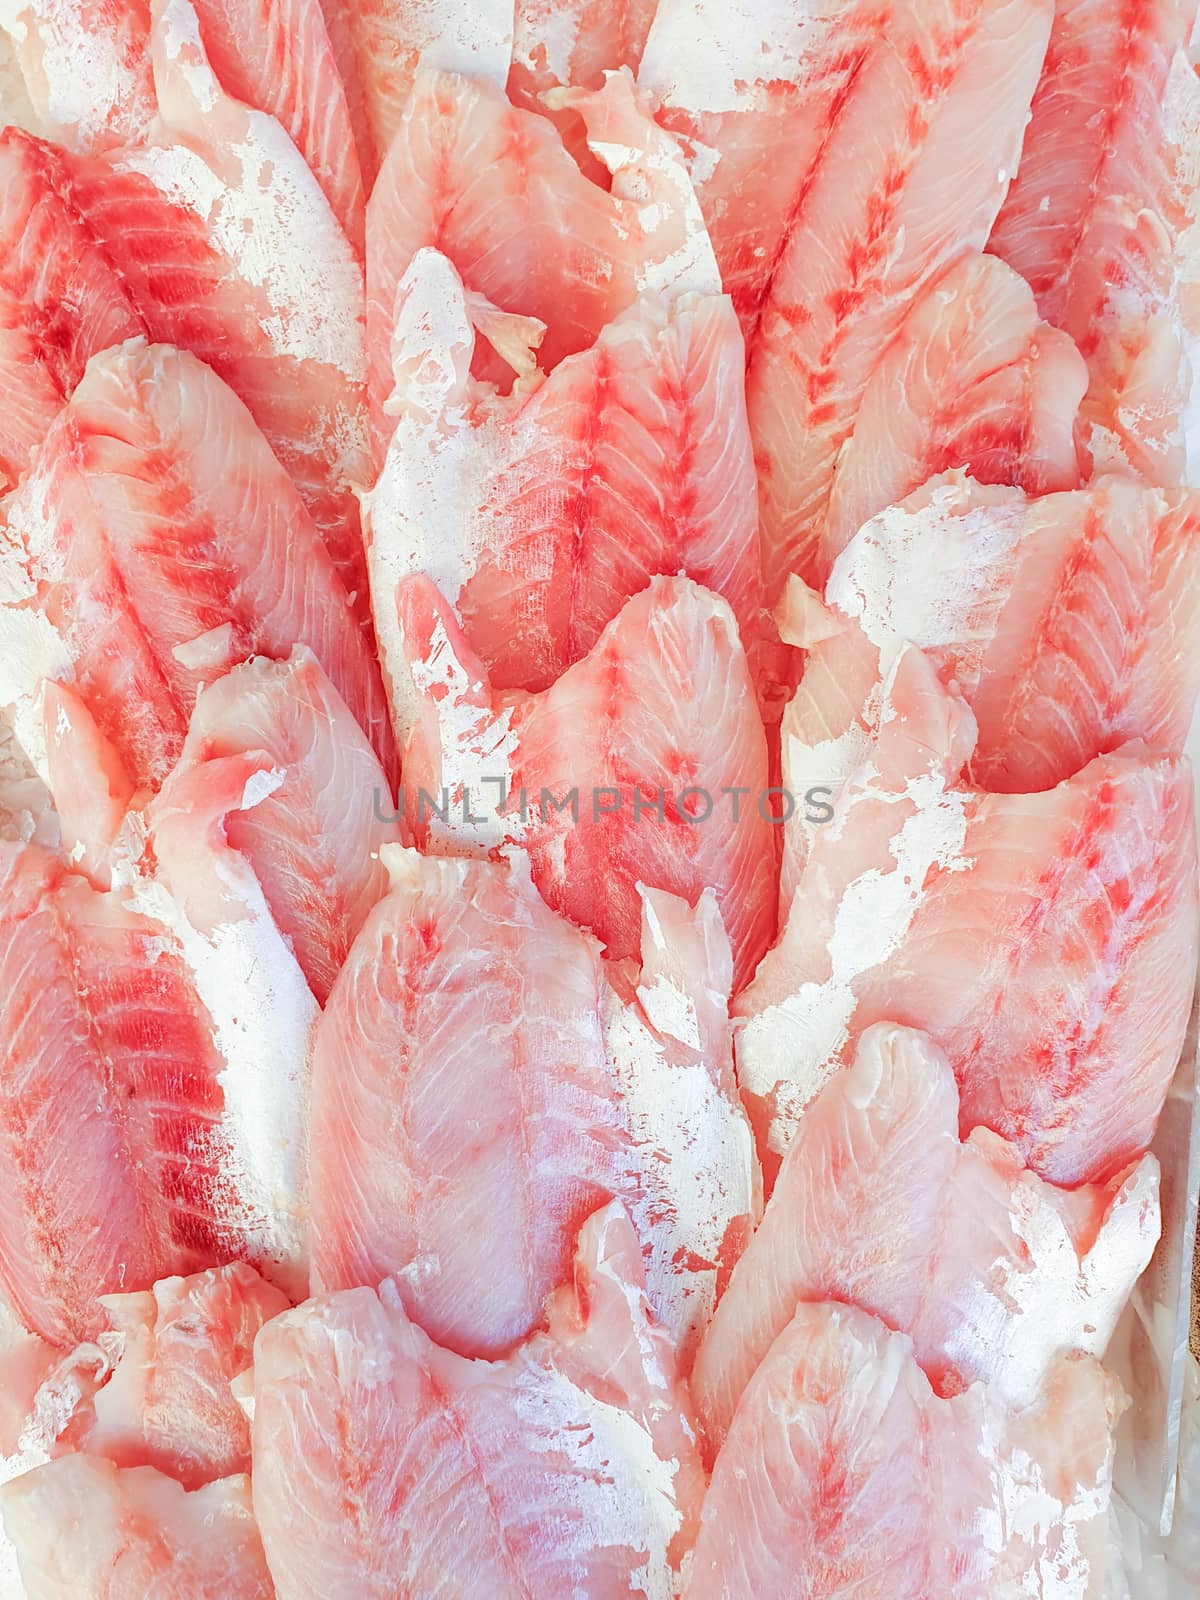 African Perch fillet on ice for sale by Robertobinetti70